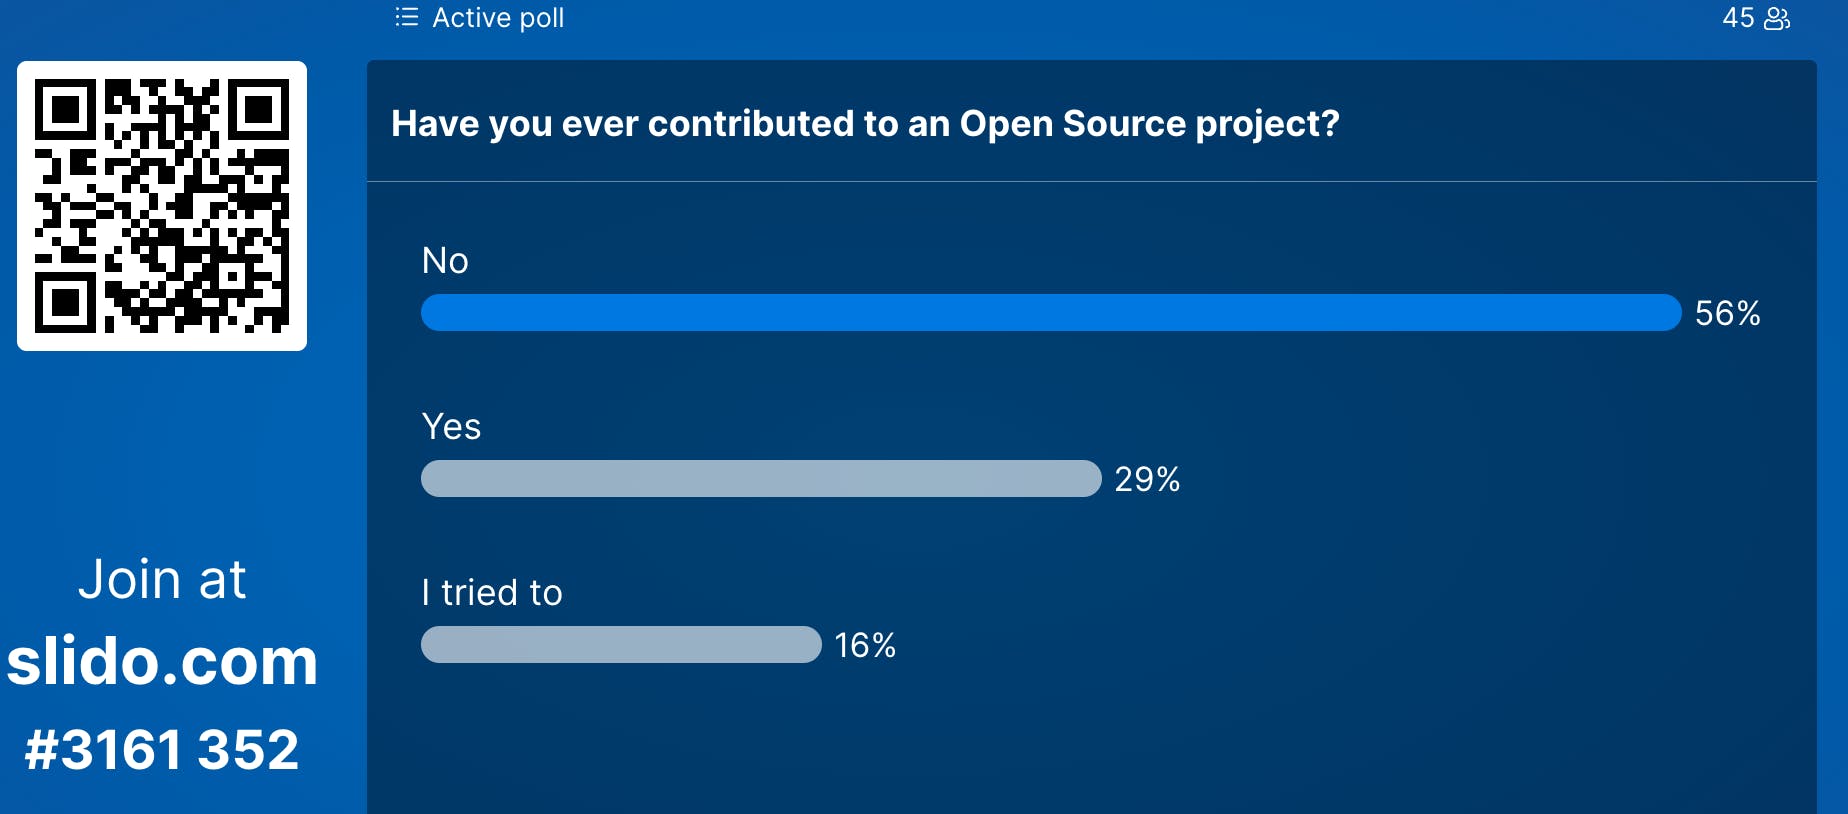 Poll on Open Source